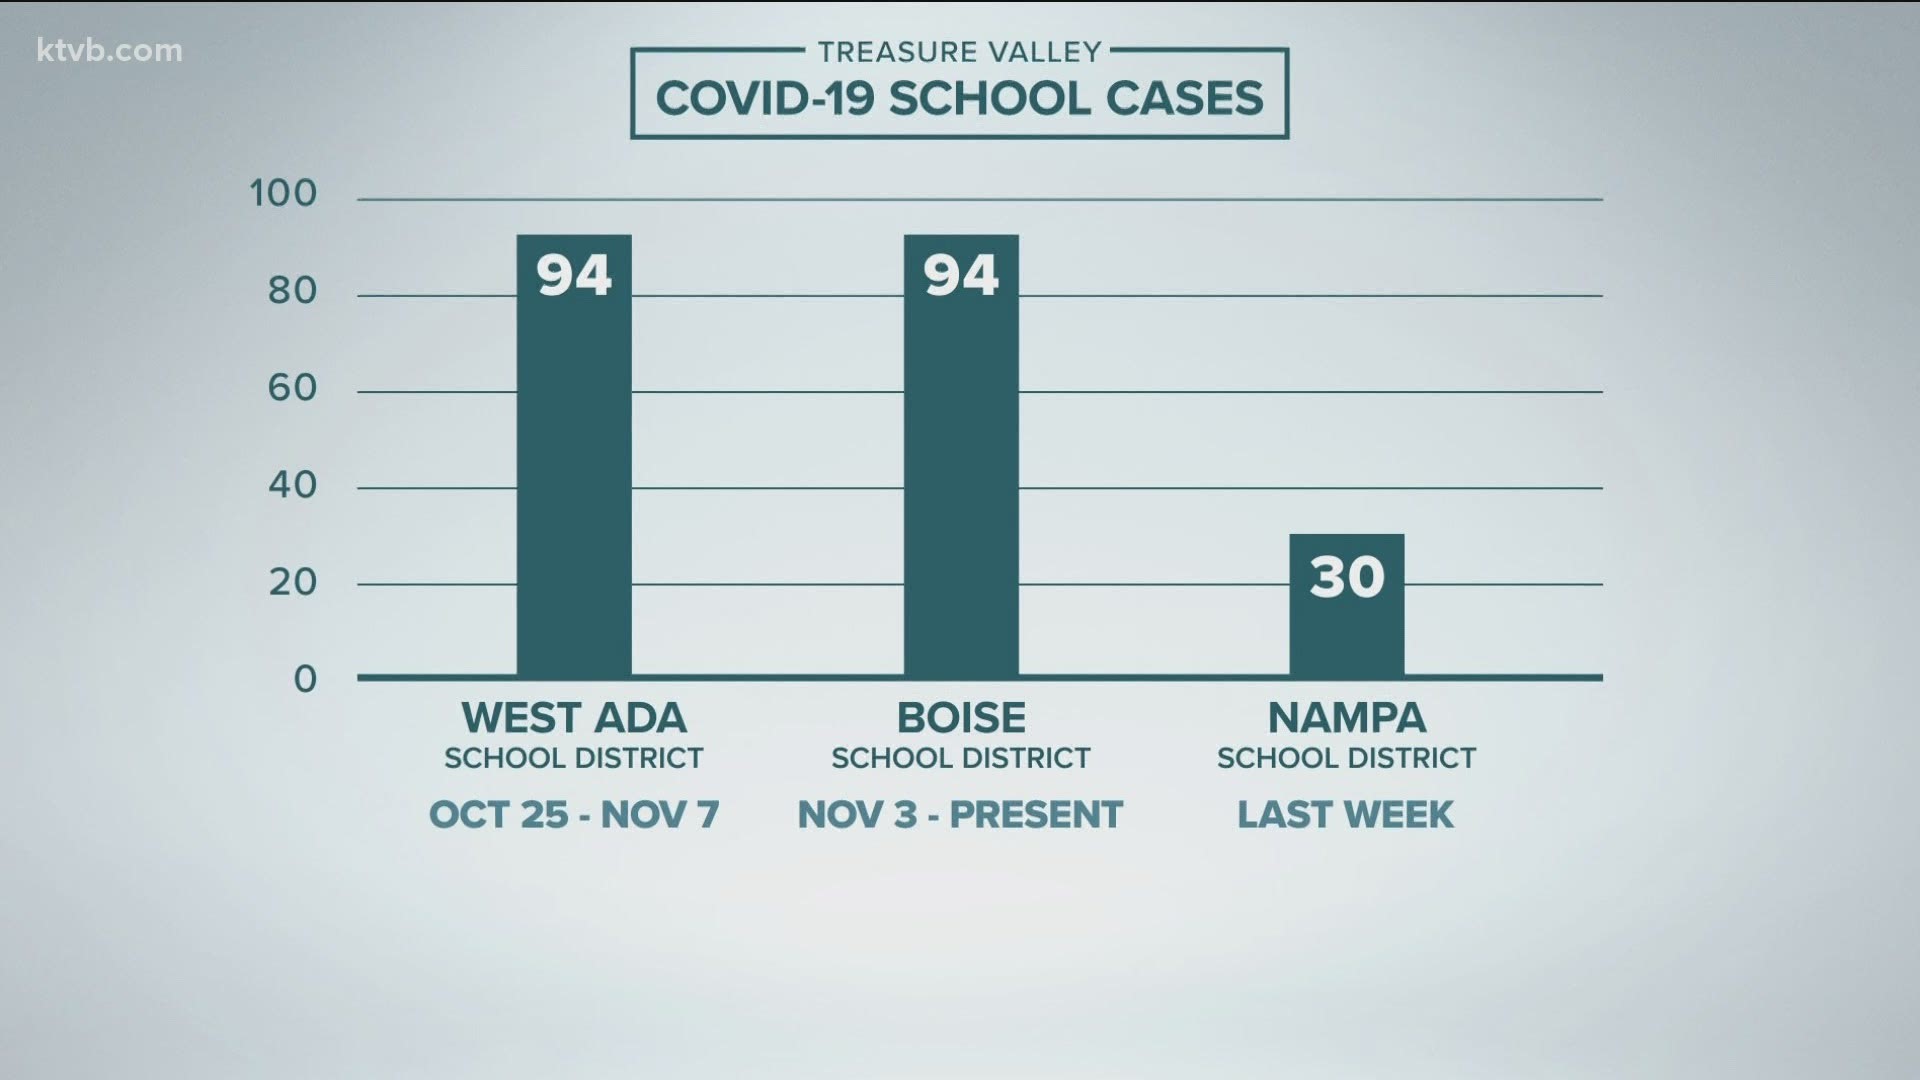 As COVID-19 cases increase in the community, local schools are seeing an increase in cases as well.